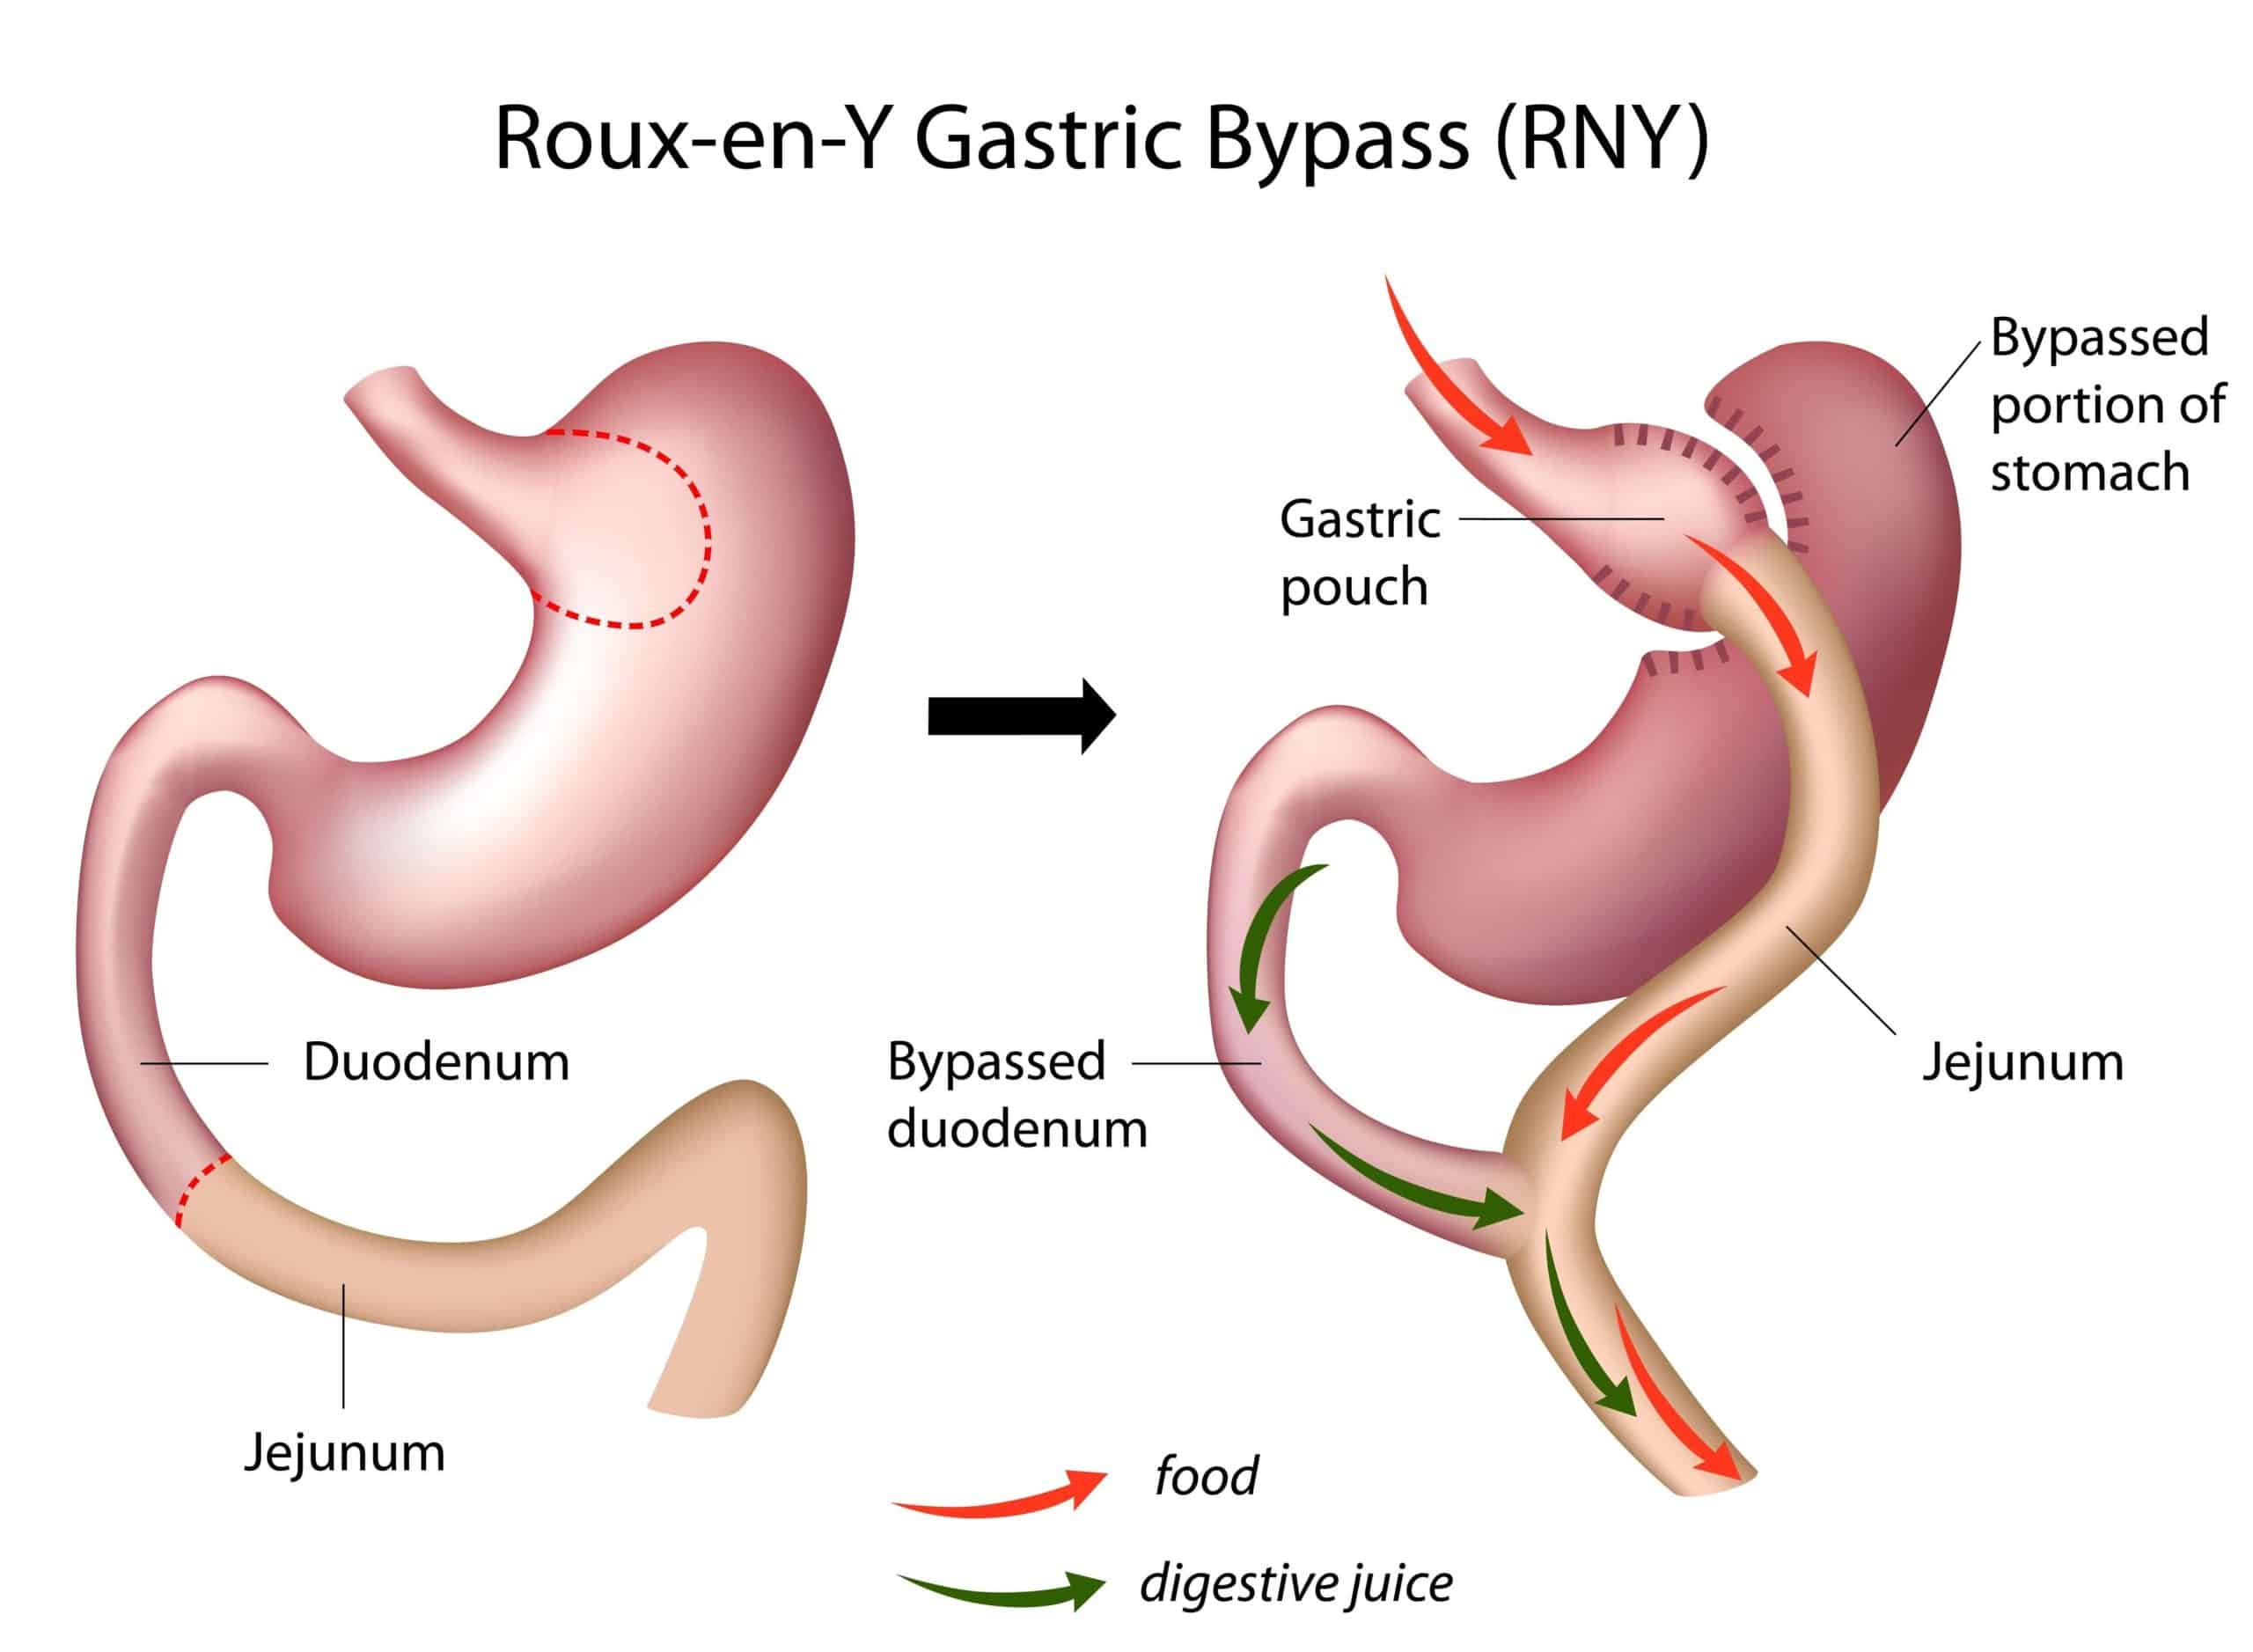 Roux-en-Y Gastric Bypass Surgery (RNY)